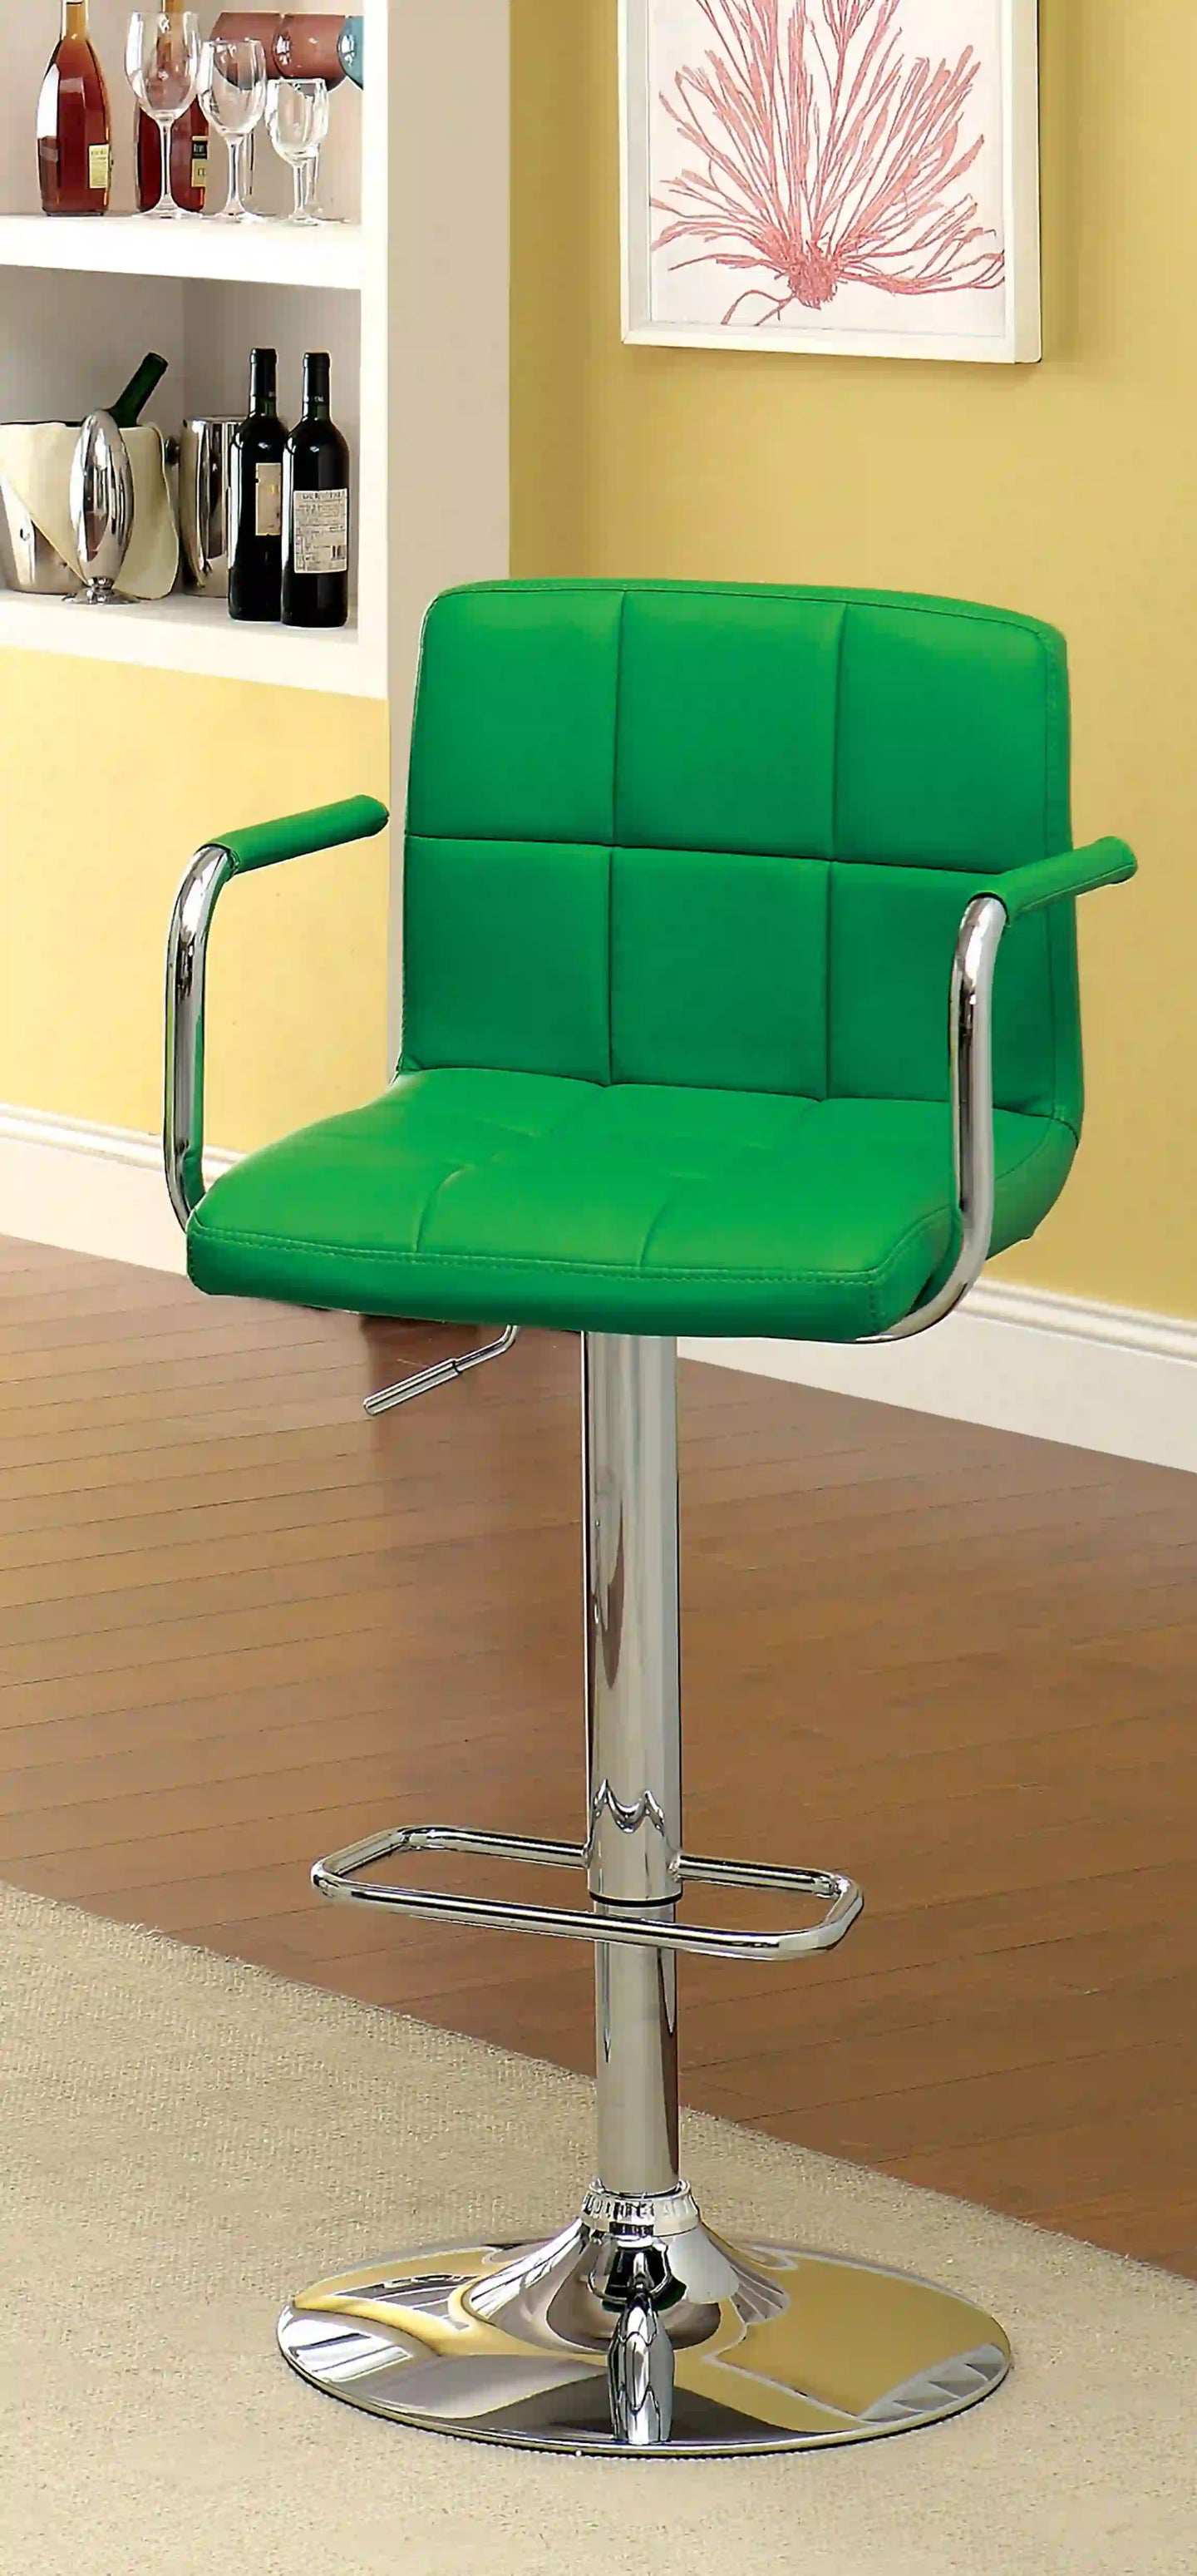 Furniture of America Witmer Contemporary Height Adjustable Bar Stool in Green - IDF-BR6917GR